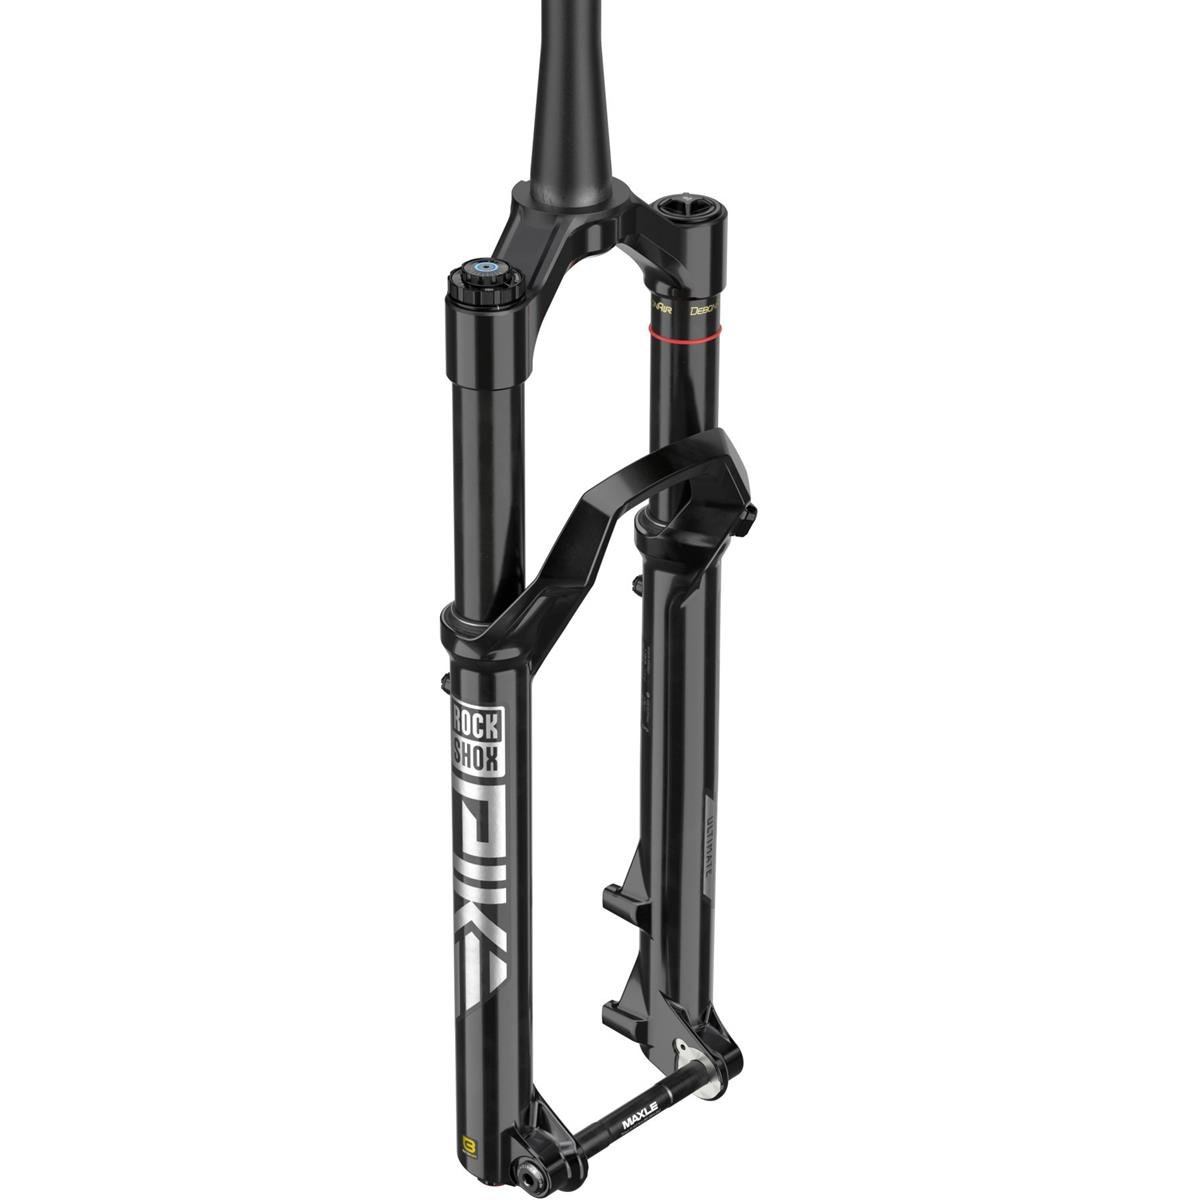 RockShox Forcella Pike Ultimate Charger 3 RC2 29 Pollici, 15x110 mm Boost, Nero, 44 mm Offset, 140 mm